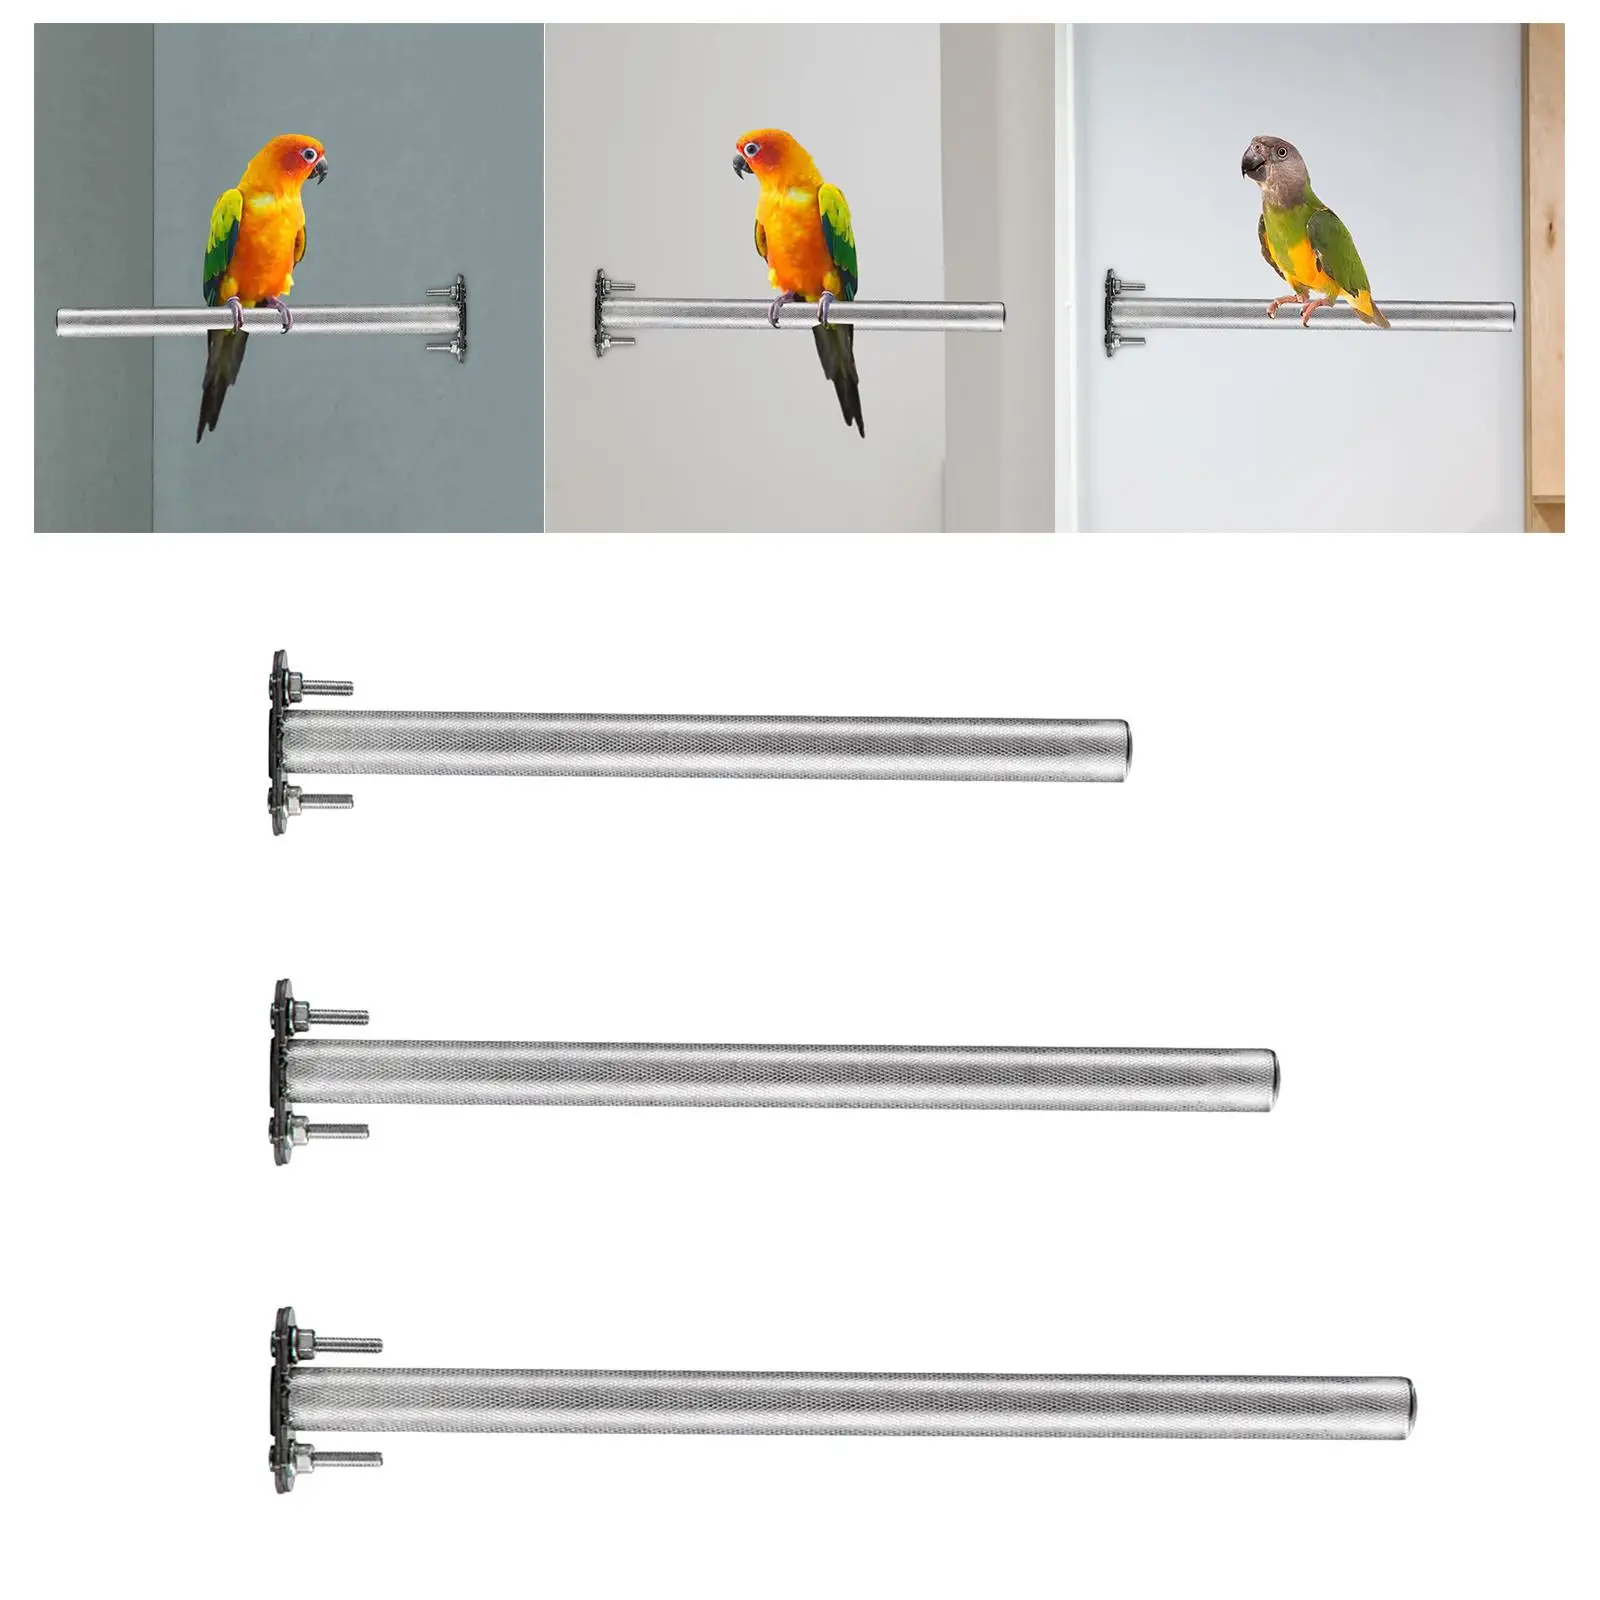 Bird Cage Perch Stainless Steel Claws Grinding Rod Bird Training Stand Bird Perch for Budgies Lovebirds Cage Accessories